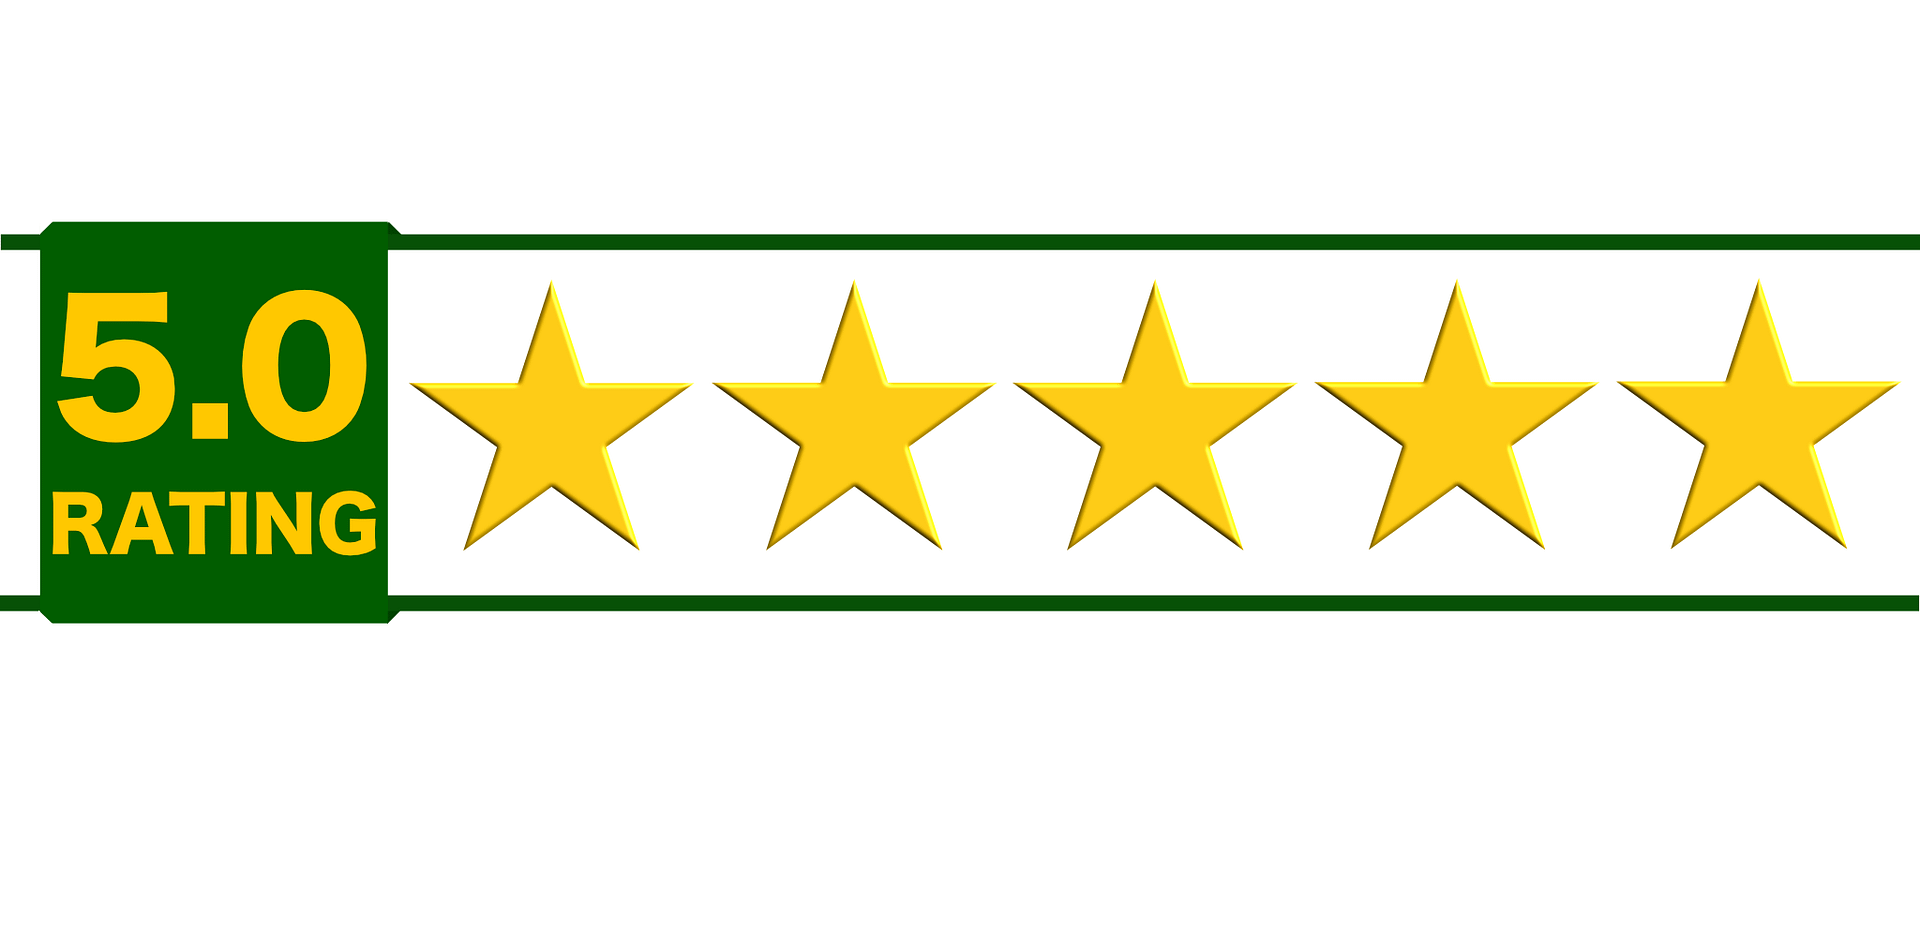 Our 5 star reviews